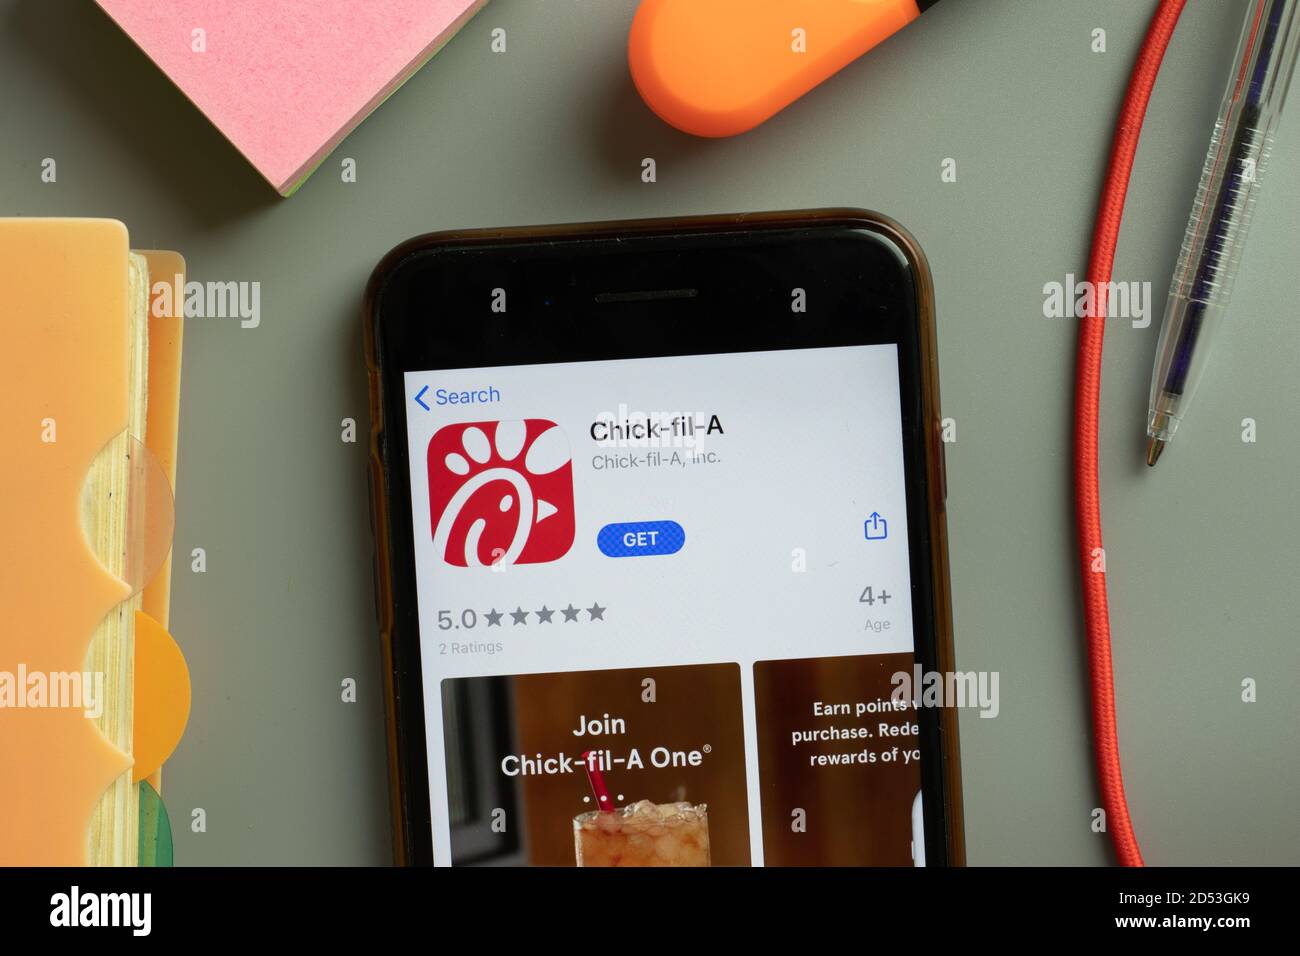 New York, USA - 29 September 2020: Chick-fil-A Chickfila mobile app logo on phone screen close up, Illustrative Editorial Stock Photo